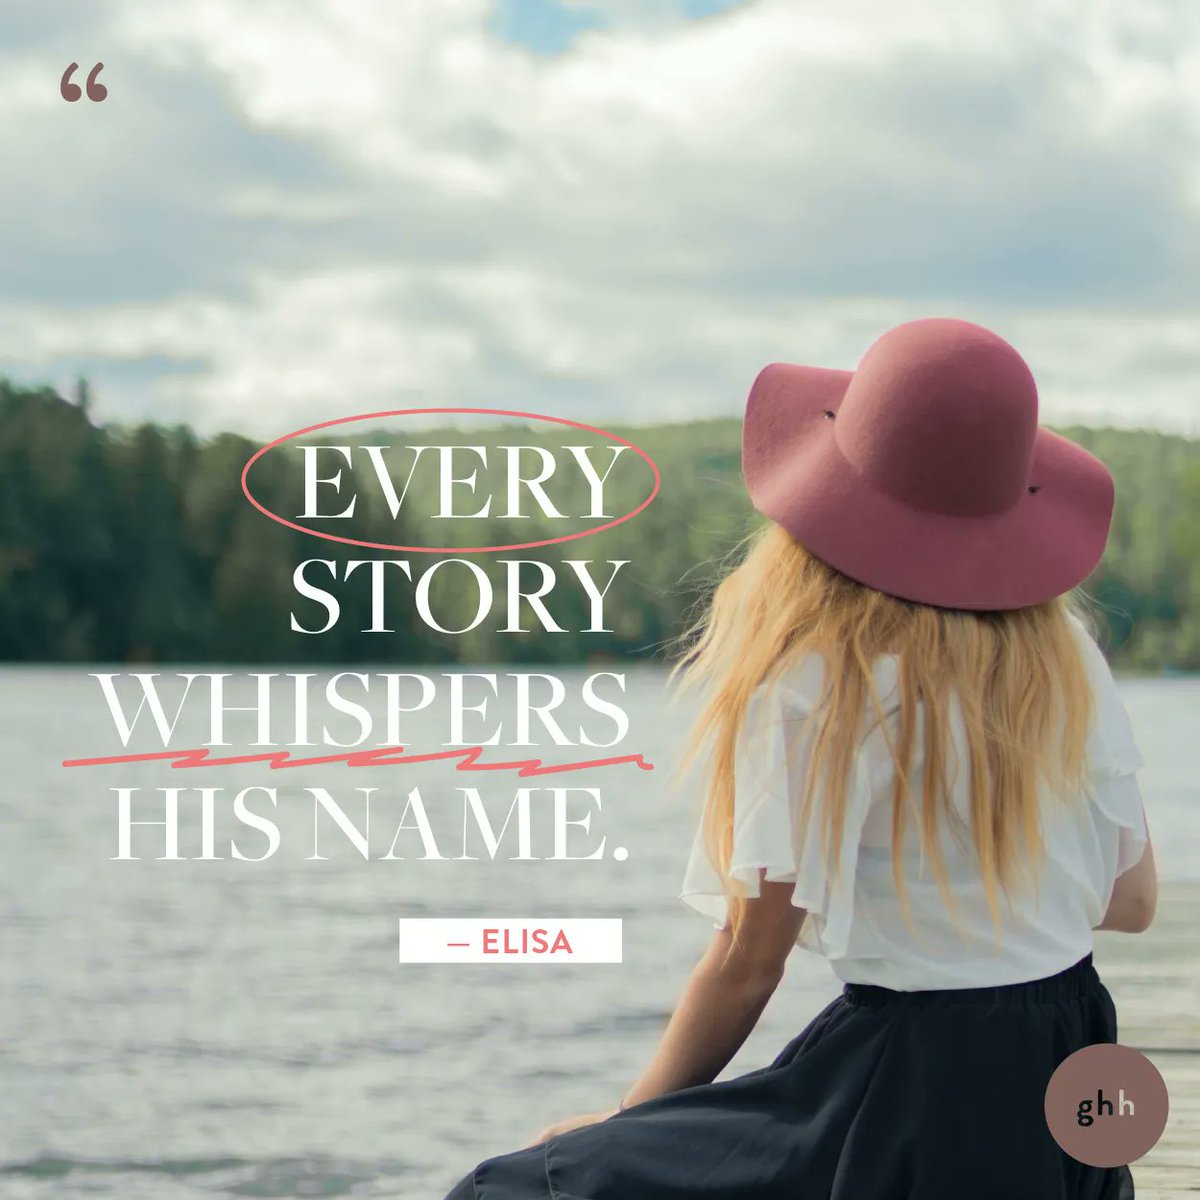 Every story whispers His name—pointing to the redemption God designed for us.

—Elisa Morgan

#godseesher
#dailydevo